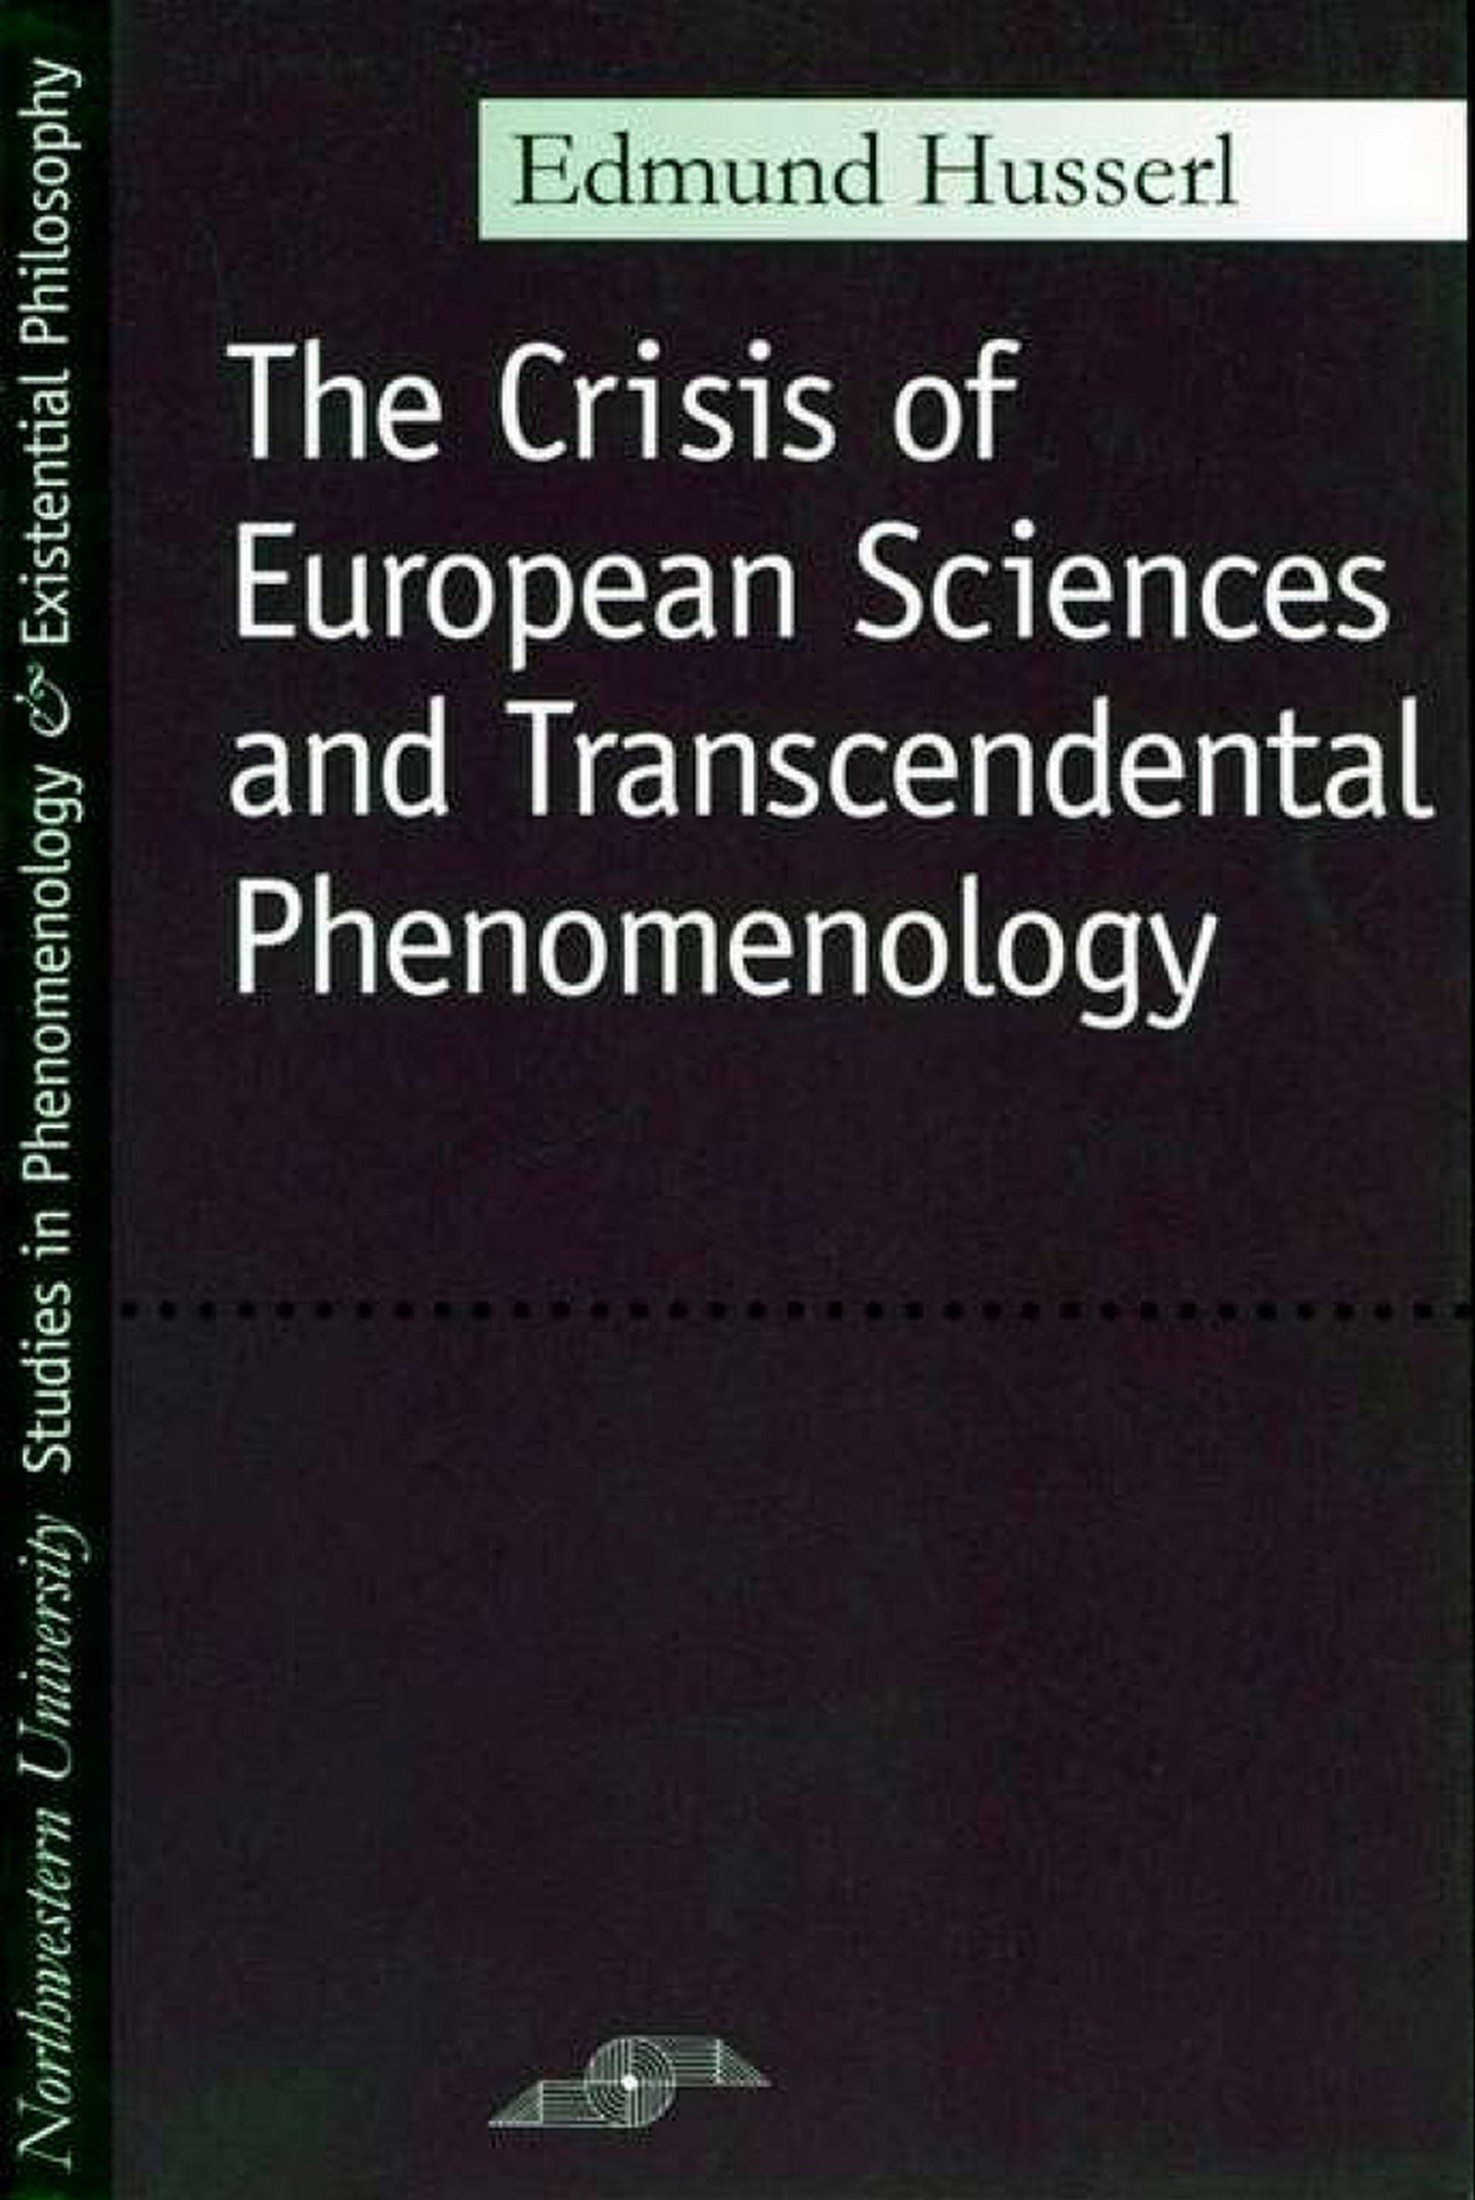 The Crisis of European Sciences and Transcendental Phenomenology: An Introduction to Phenomenological Philosophy